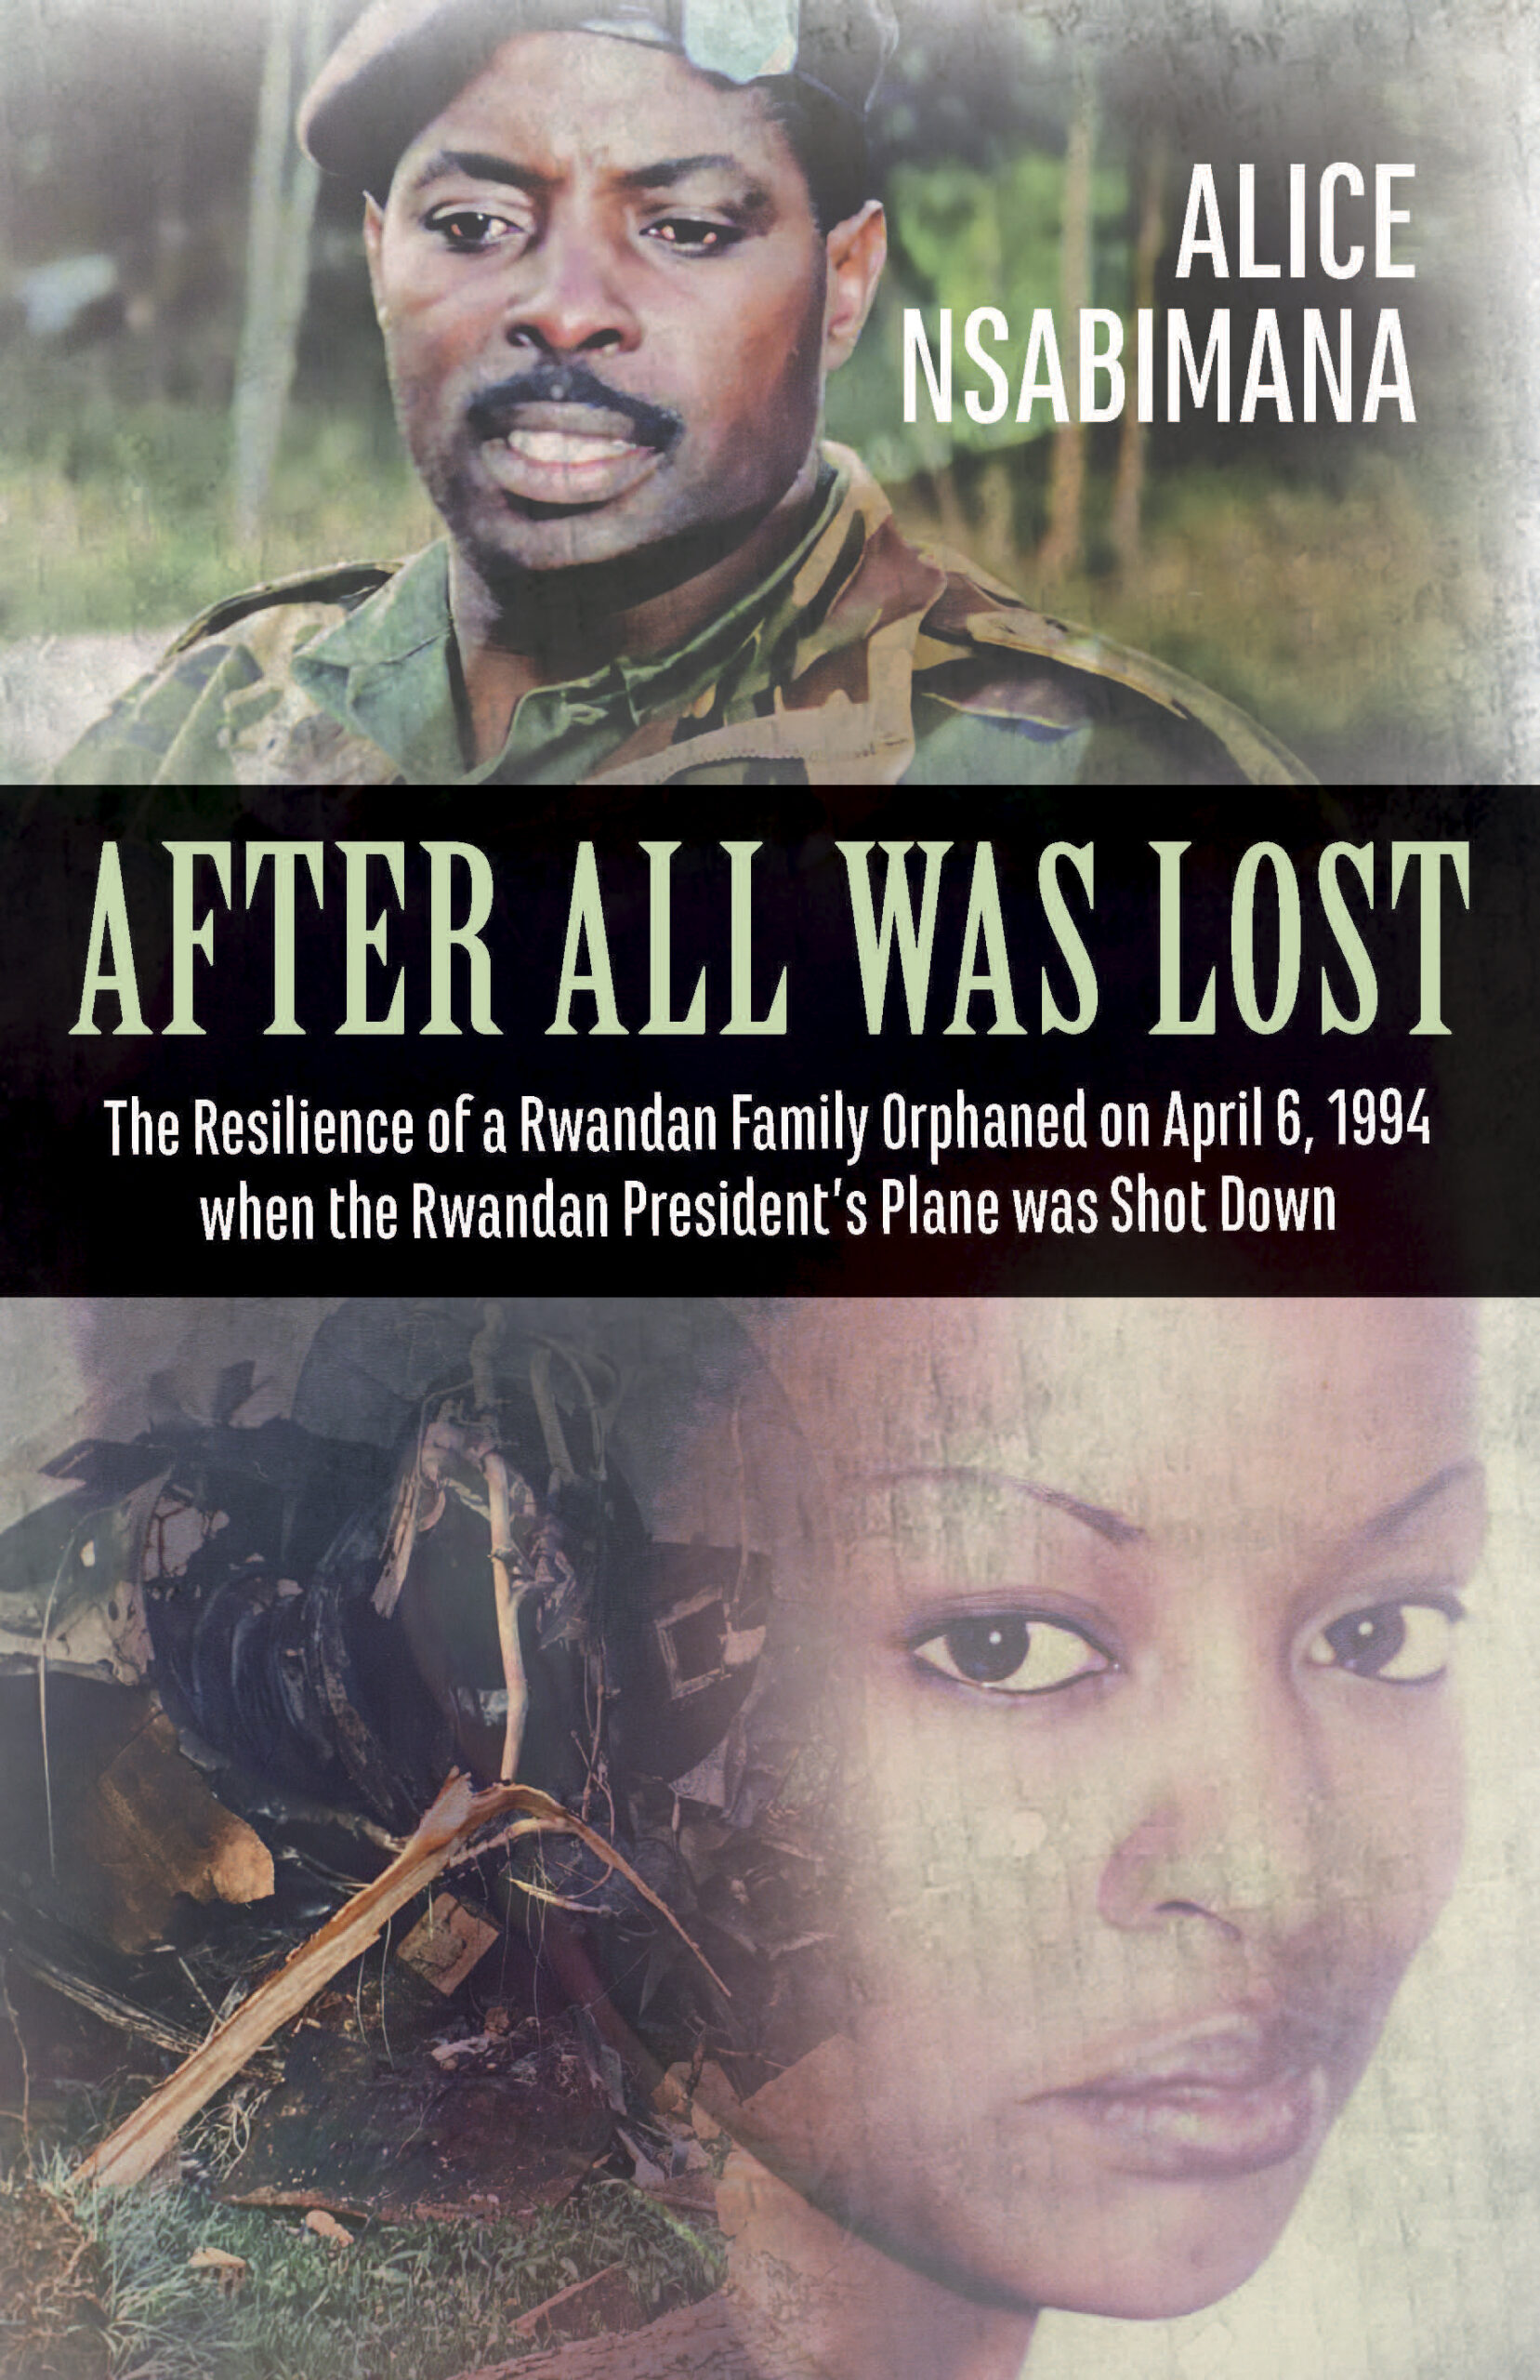 After All Was Lost: The Resilience of a Rwandan Family Orphaned on April 6, 1994 when the Rwandan President’s Plane was Shot Down